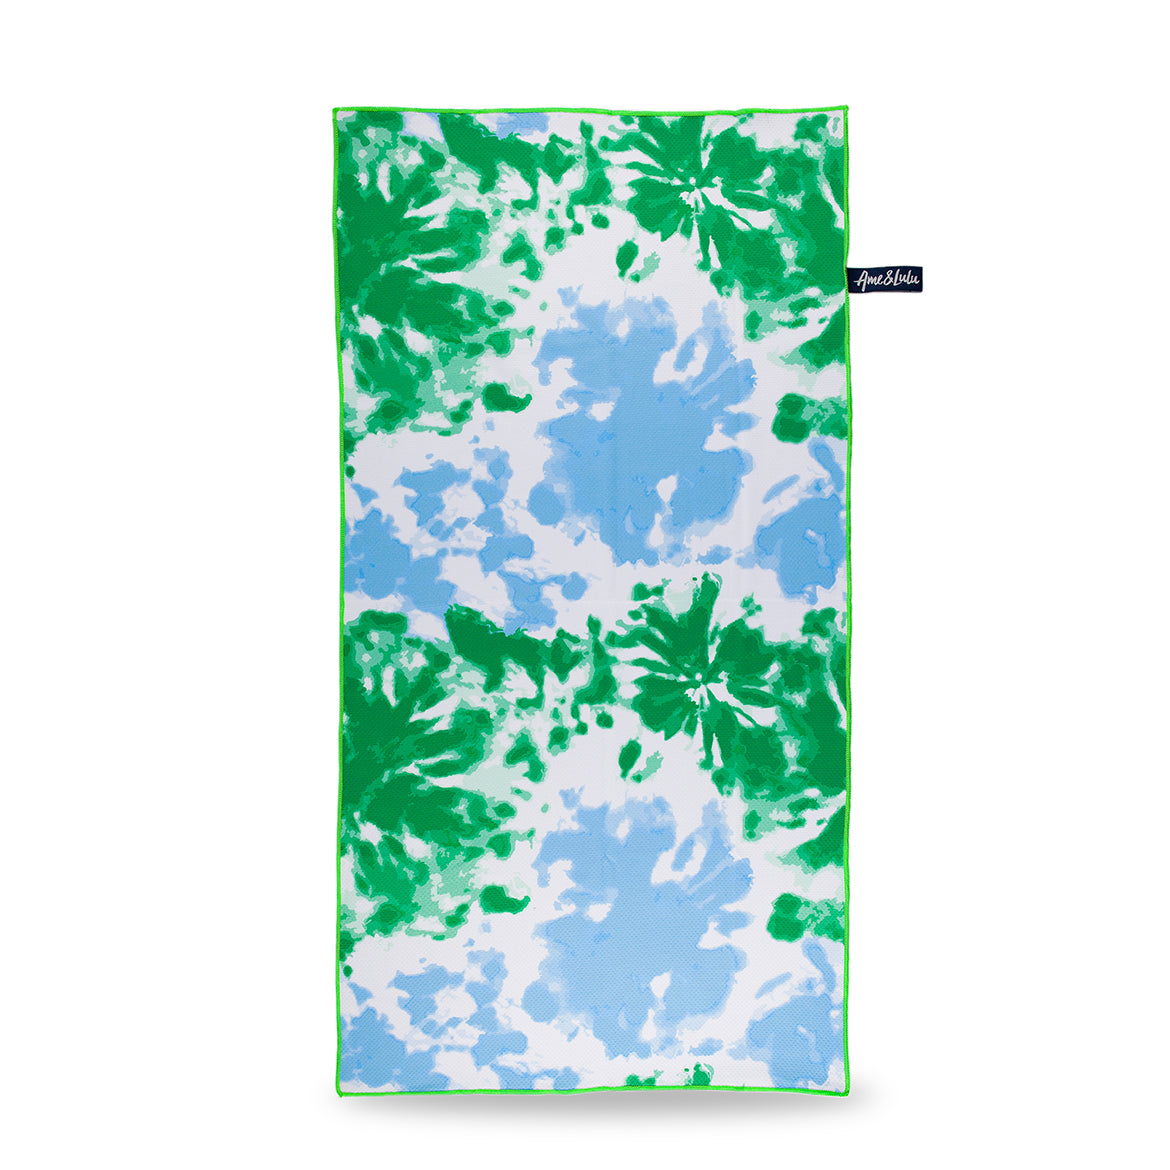 rectangular towel printed with green and blue tie dye pattern.